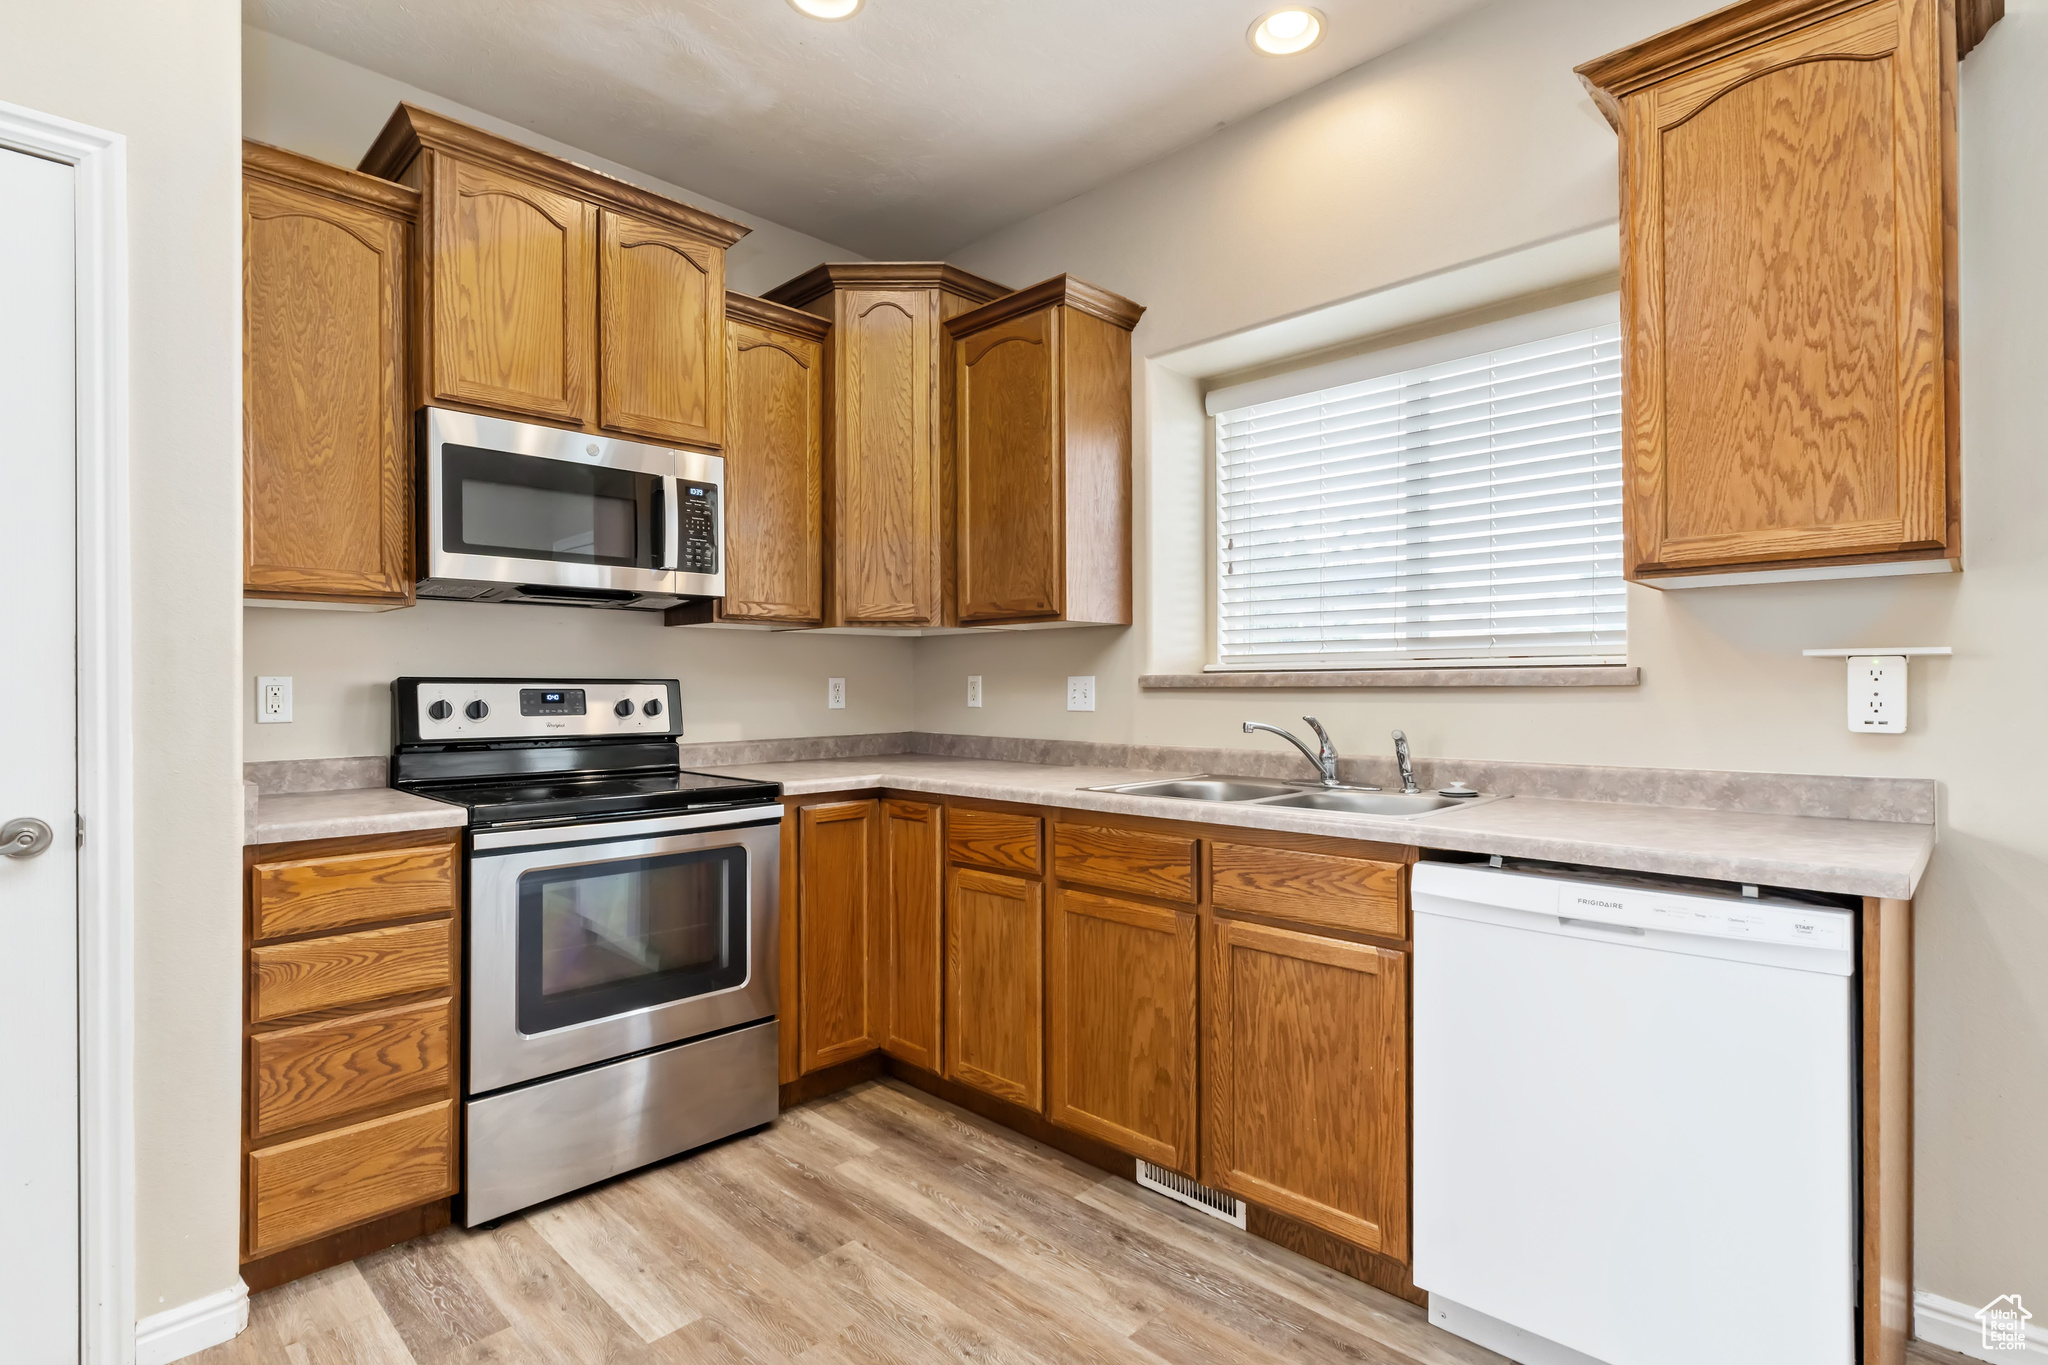 Kitchen featuring light hardwood / wood-style floors, appliances with stainless steel finishes, and sink